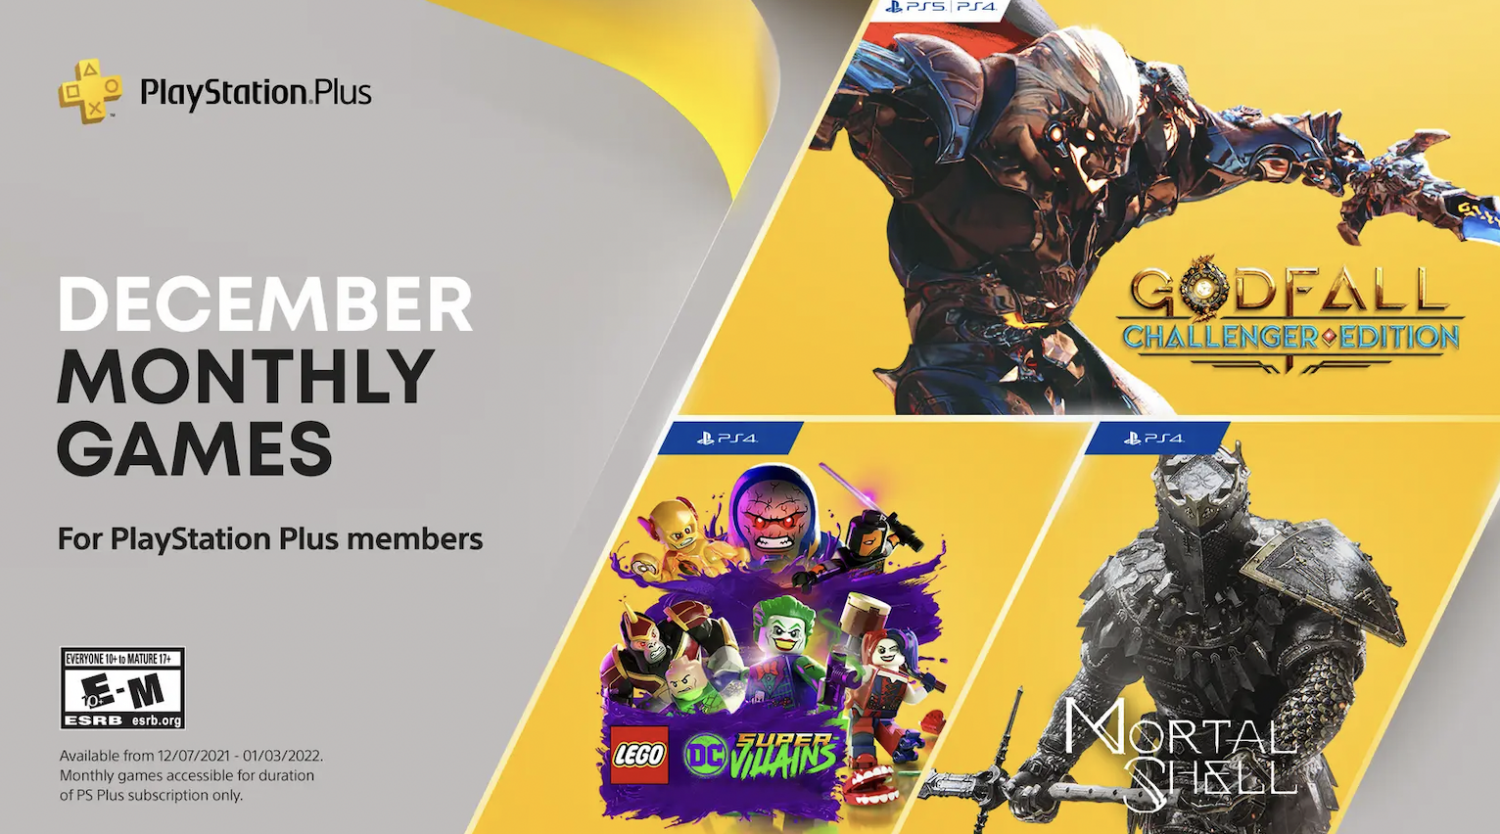 PS Plus December Monthly Game